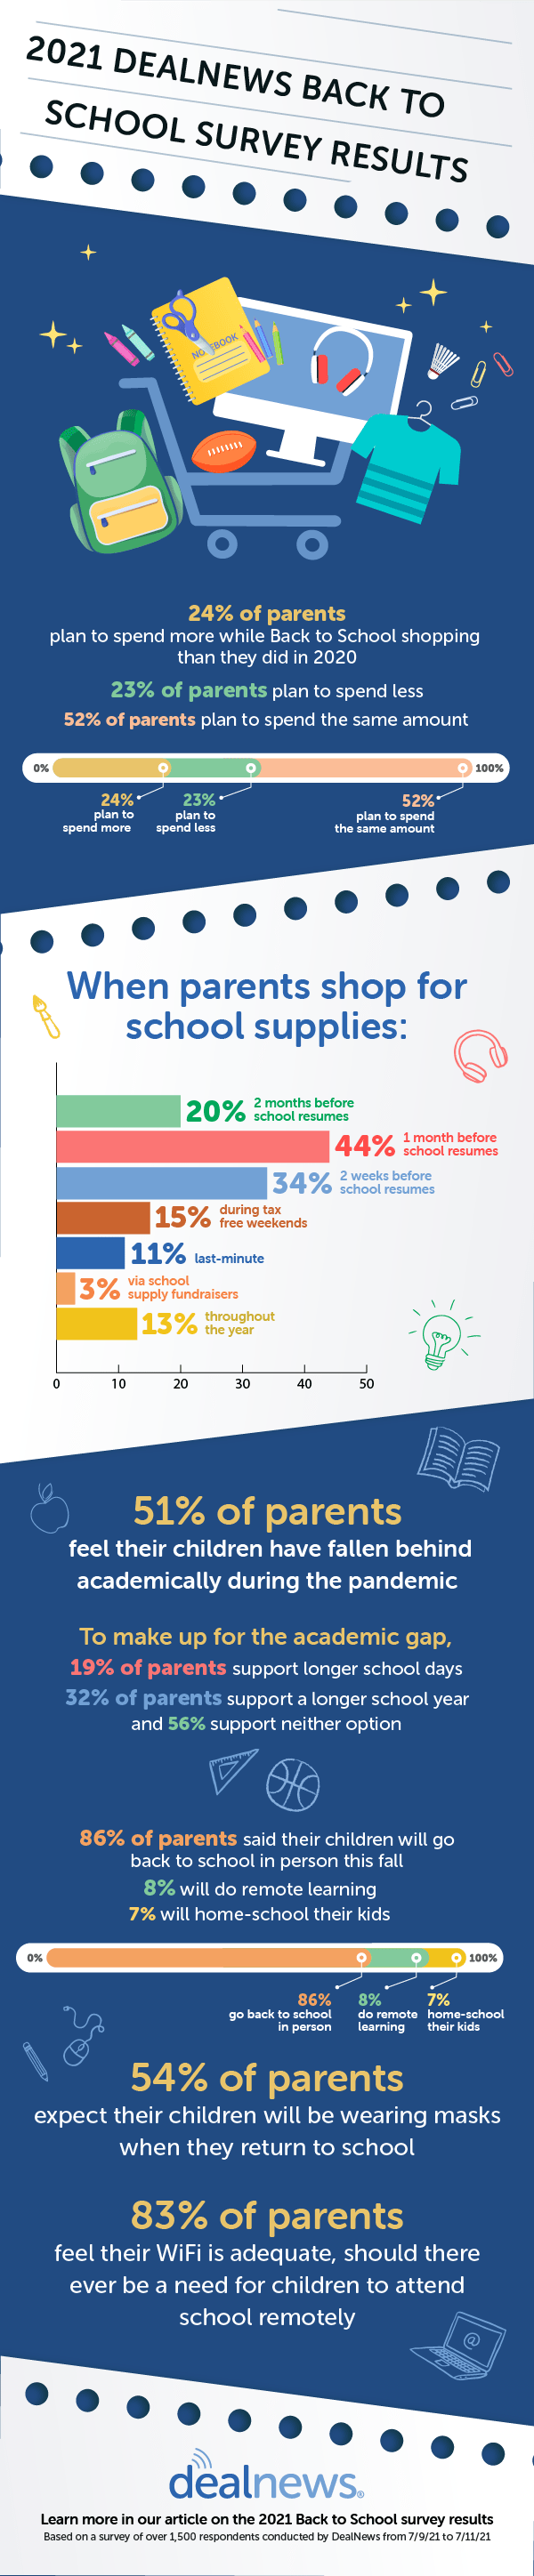 Back to School 2021 survey results